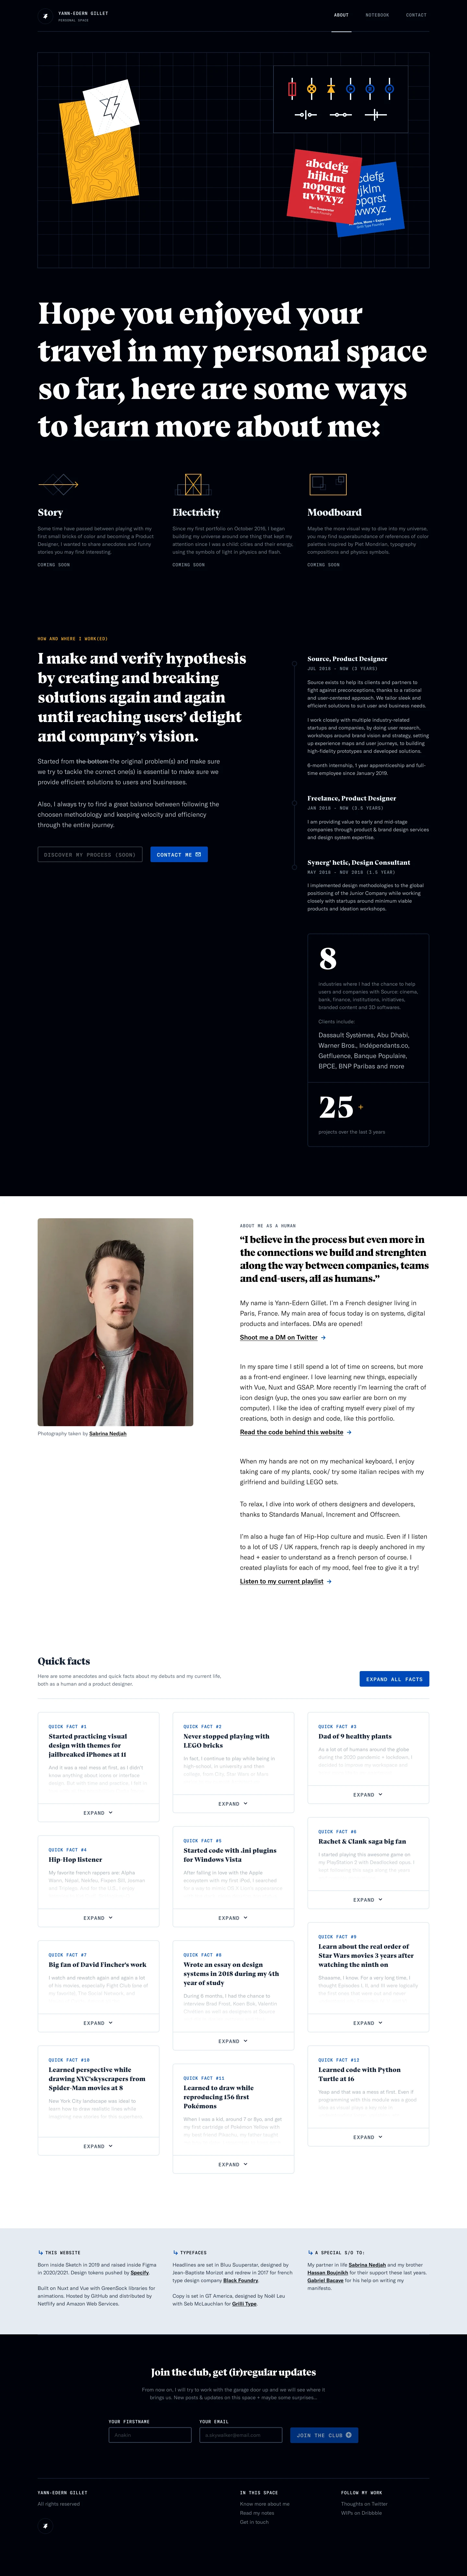 Yann-Edern Gillet Landing Page Example: Personal space of Yann-Edern Gillet, a designer thinking, creating and breaking interfaces, products and systems with a focus on design operations.